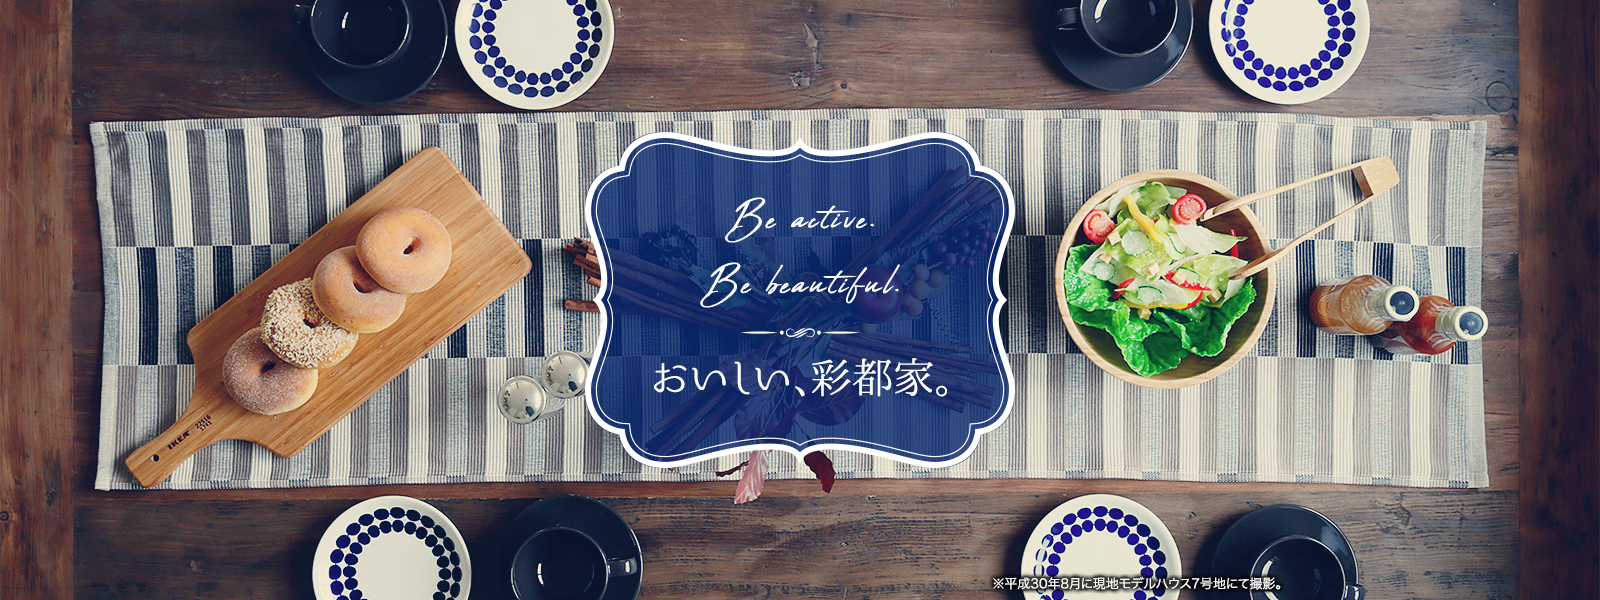 Be active.Be beautiful.おいしい、彩都家。